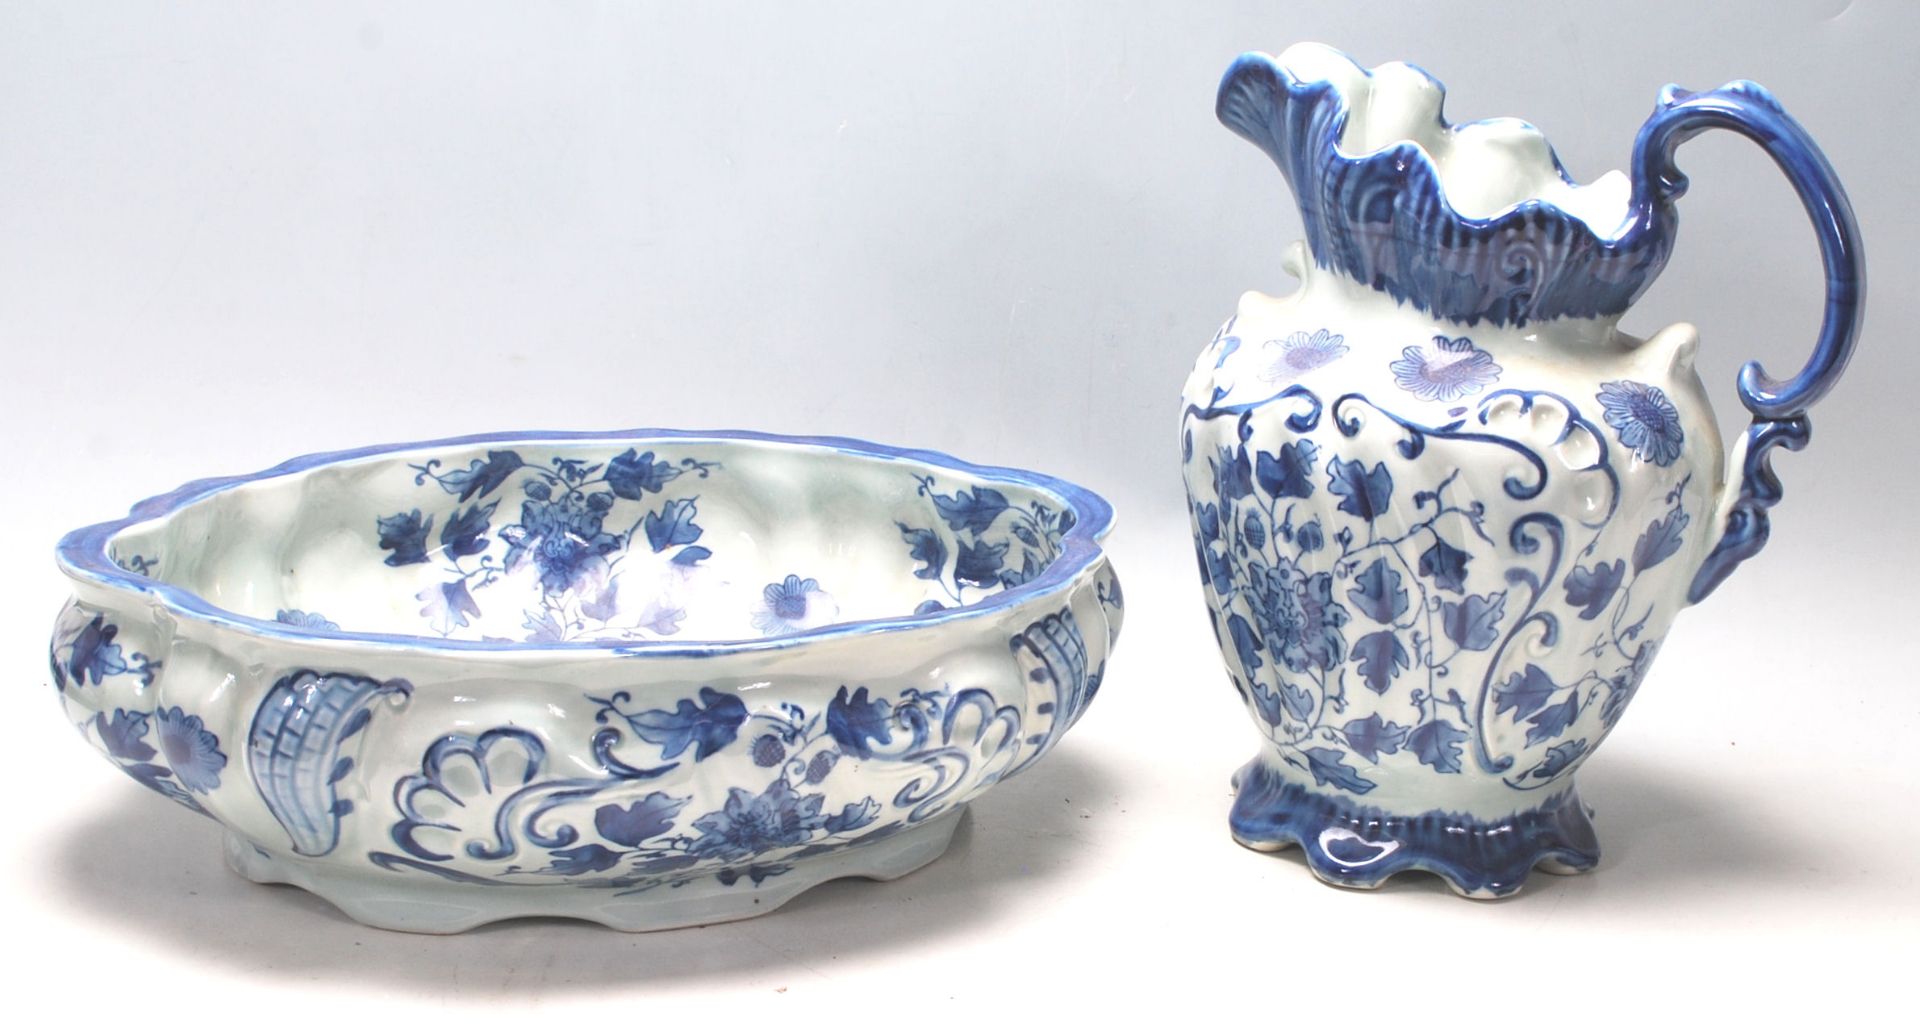 A 20th Century Victorian ironstone ceramic blue and white jug and bowl / pot having floral sprays